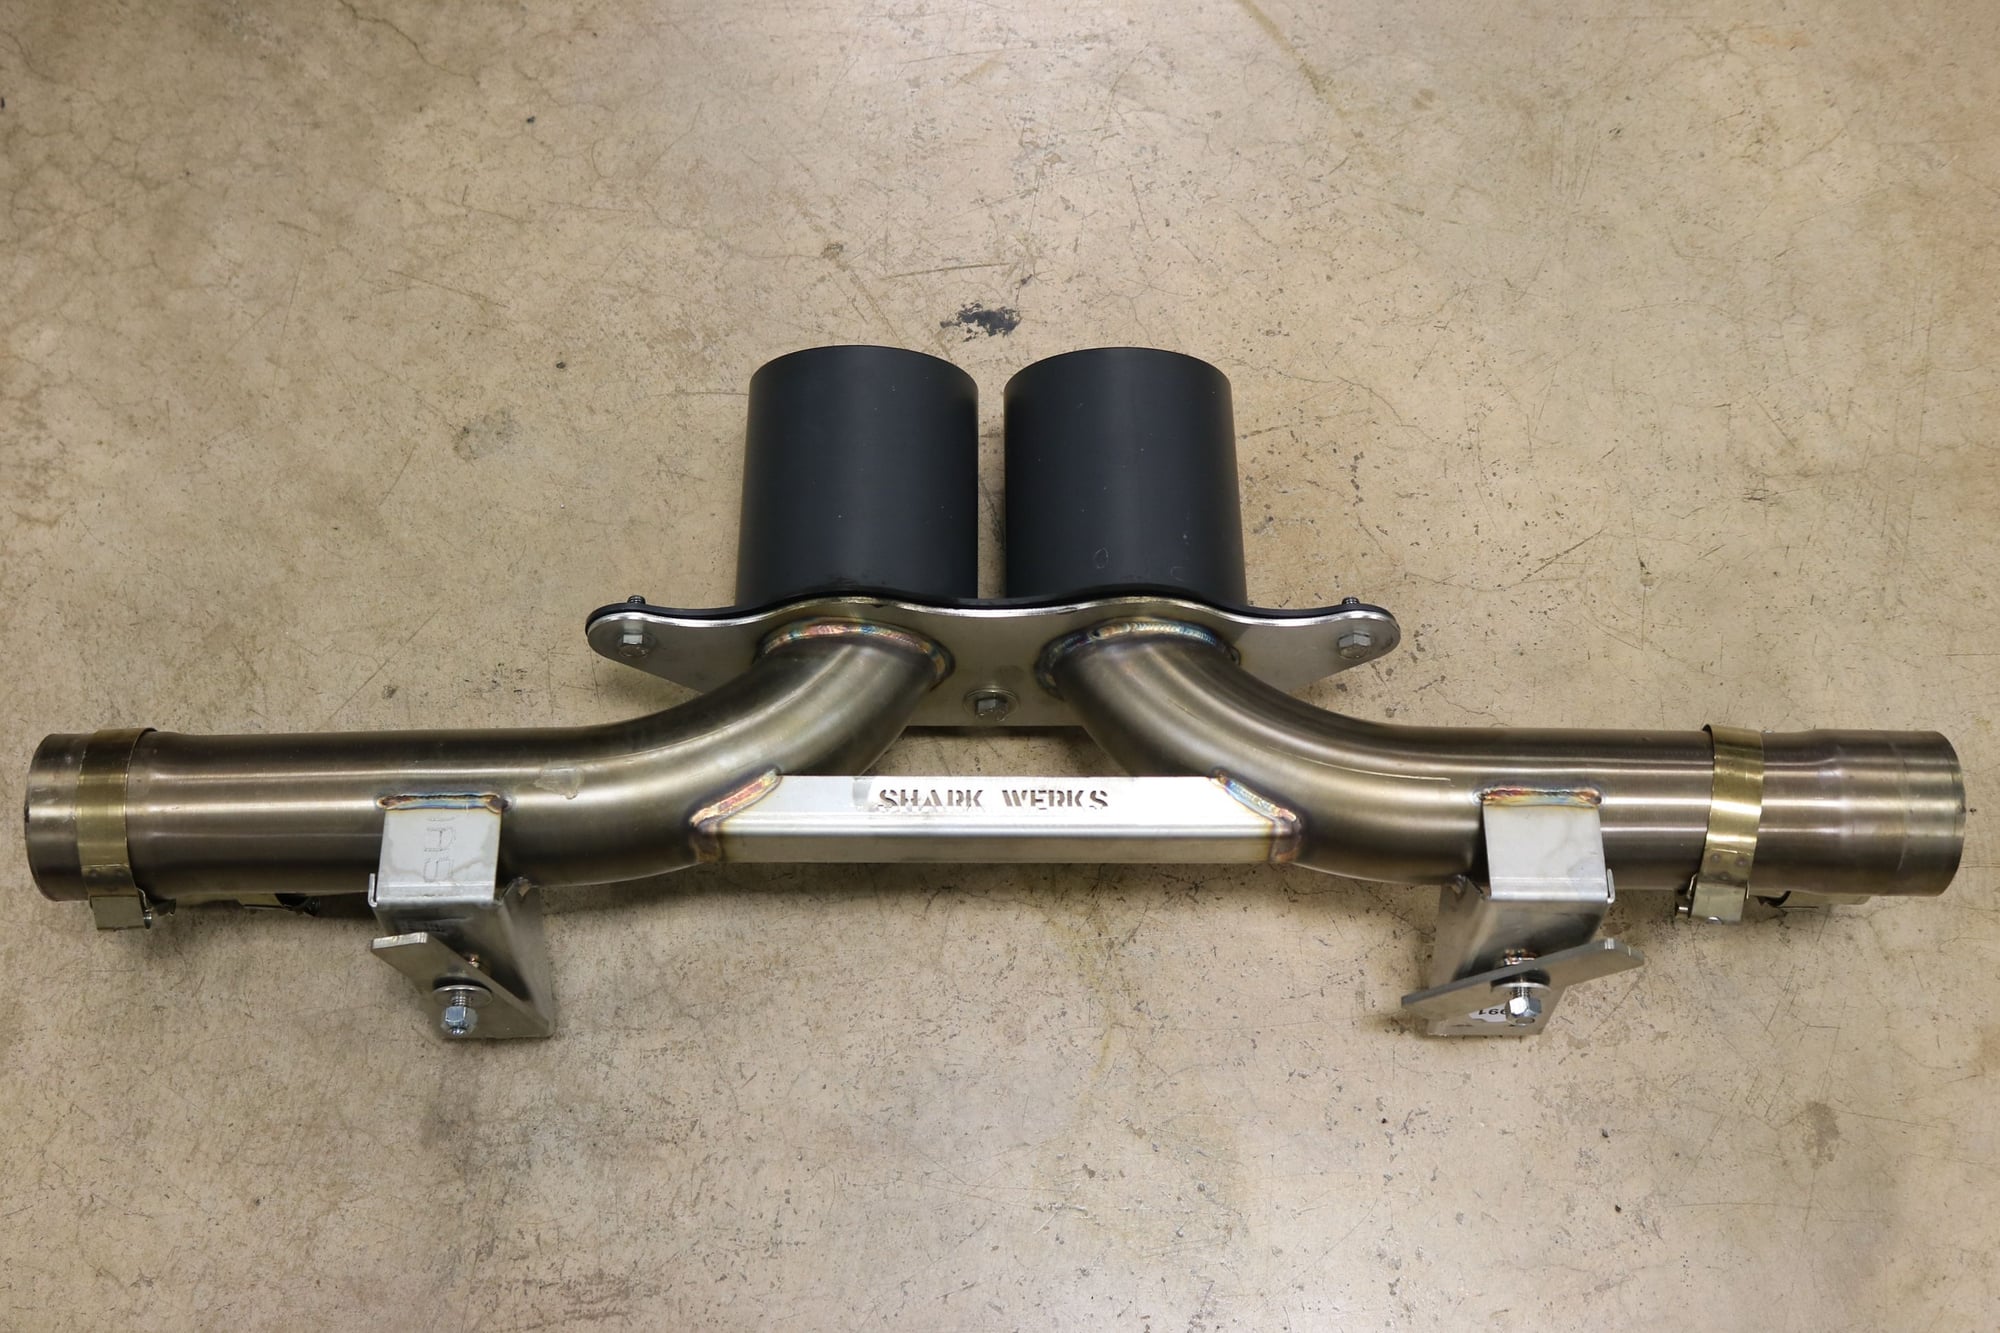 Engine - Exhaust - 991 GT3 Sharkwerks Bypass Exhaust - Used - 2014 to 2018 Porsche 911 - Springfield Mo, MO 65802, United States